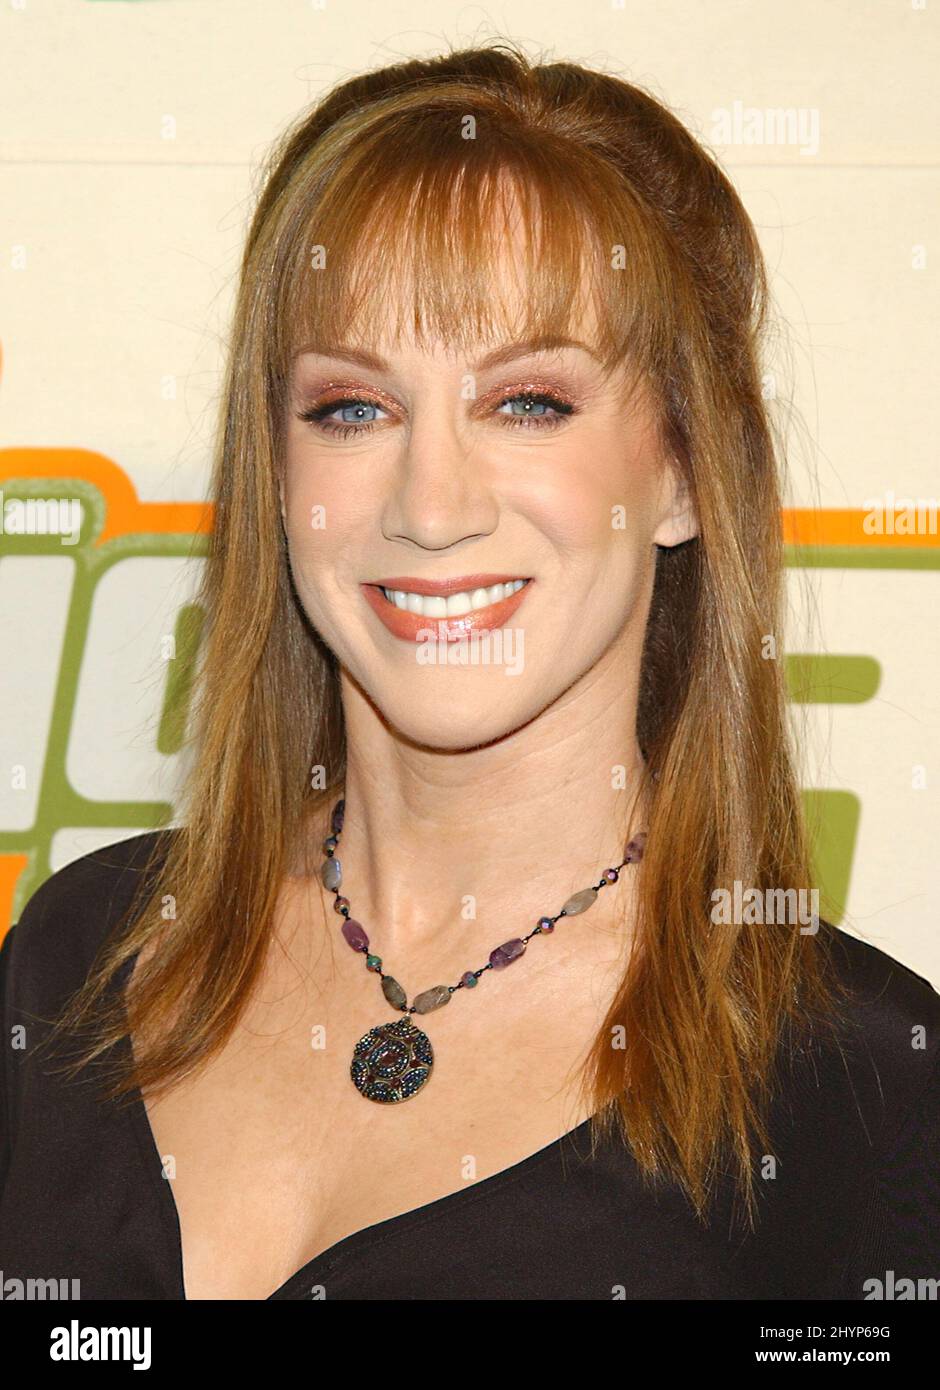 KATHY GRIFFIN ATTENDS THE 'VH-1 BIG IN 2003' AWARDS IN UNIVERSAL CITY, CALIFORNIA. PICTURE: UK PRESS Stock Photo